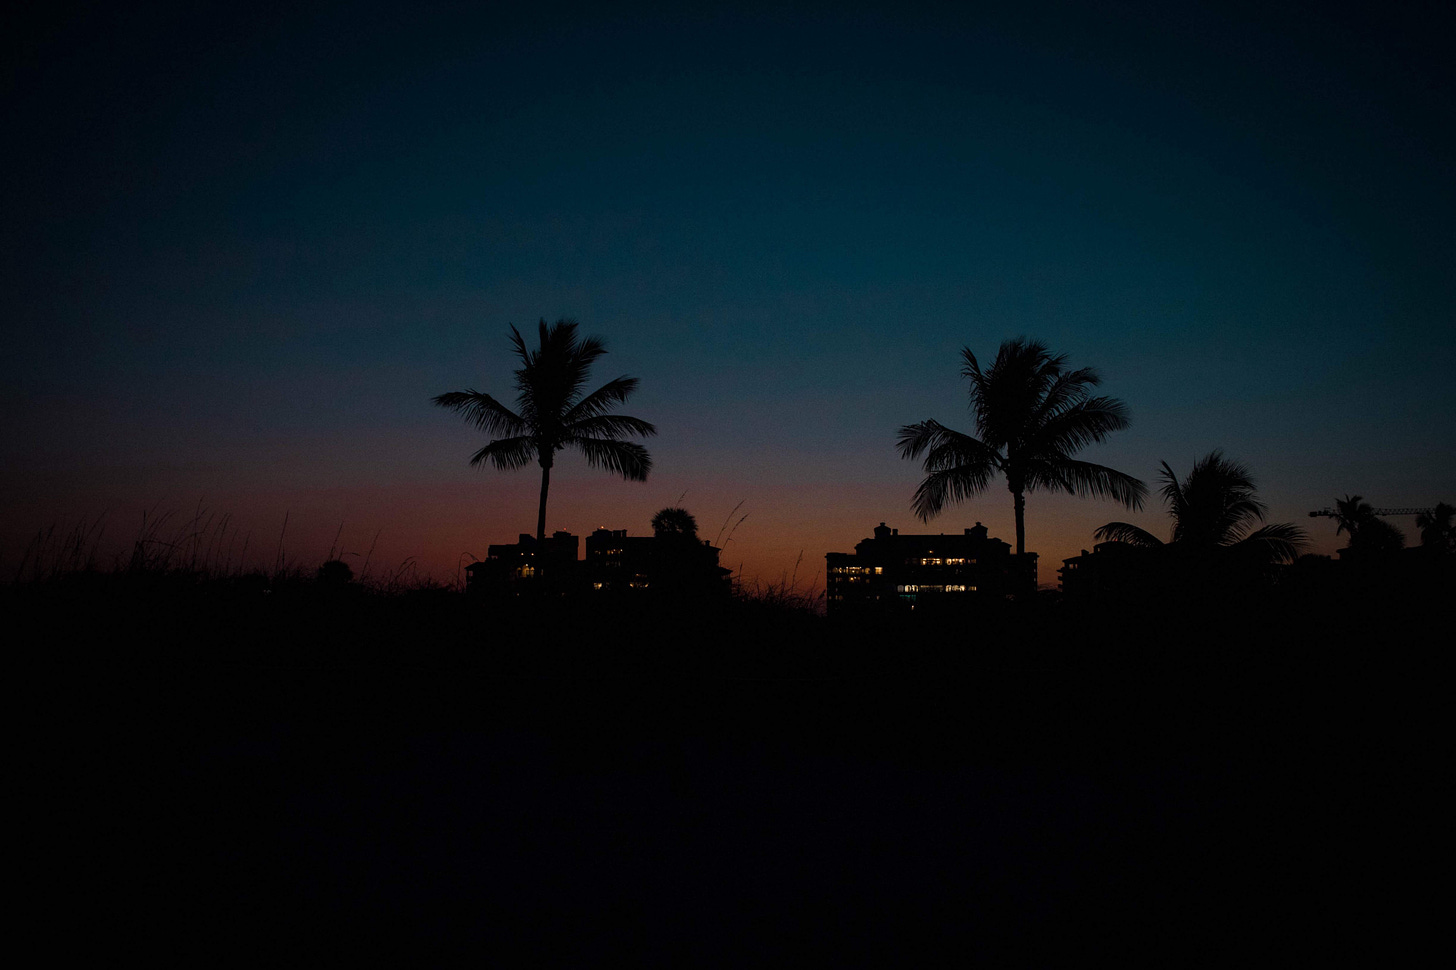 Palm trees and buildings silhouetted at night.